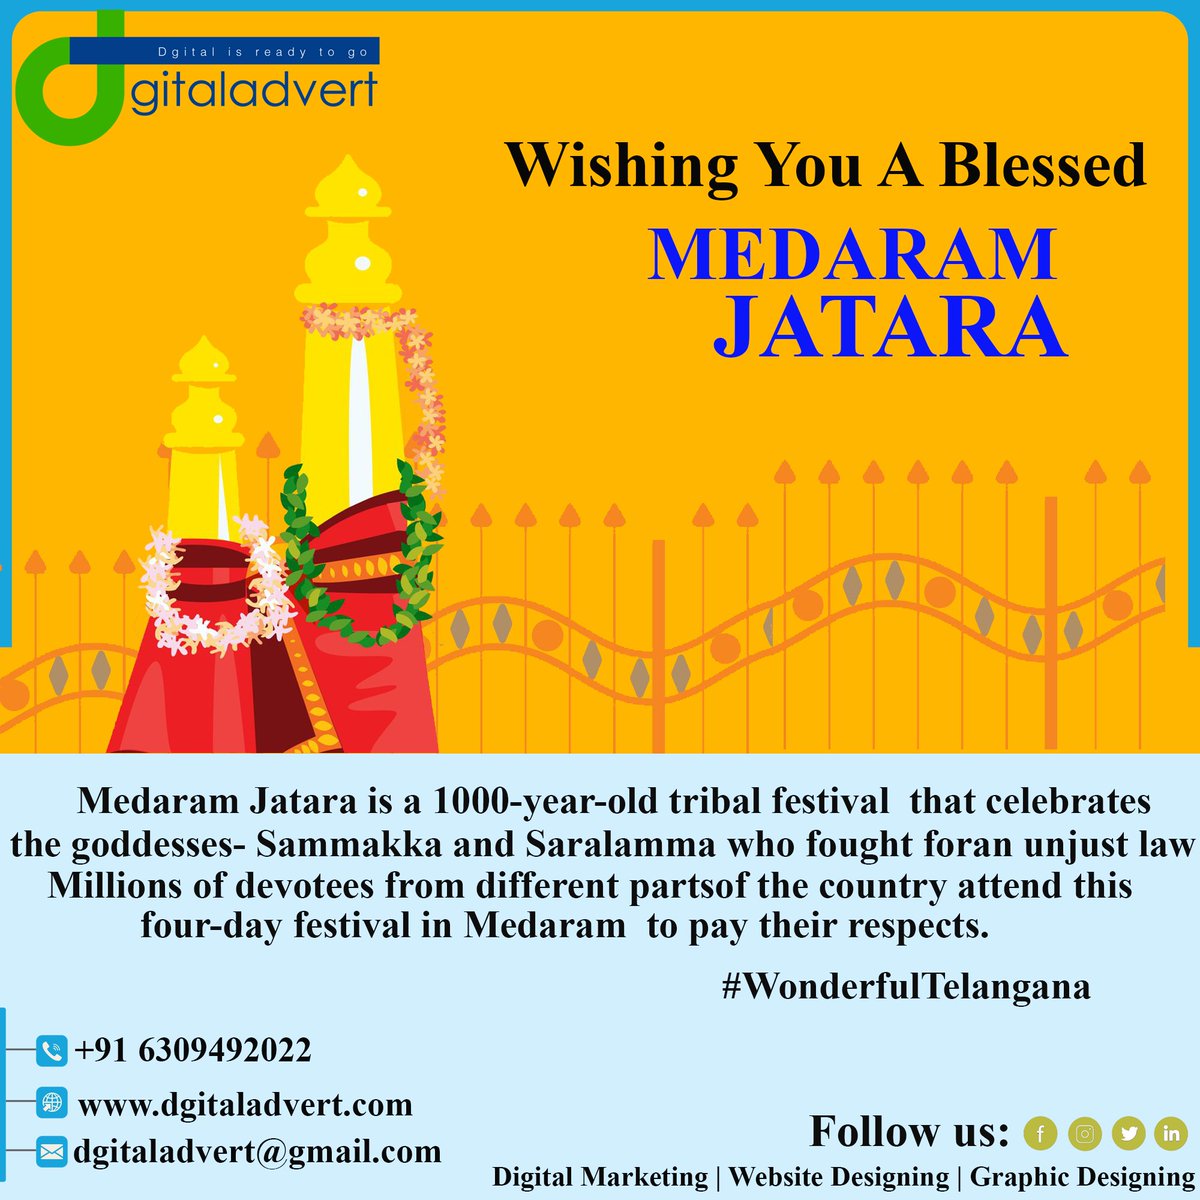 #MedaramJatara is a 1000-year-old #tribalfestival that celebrates the goddesses- #Sammakka and #Saralamma who fought an unjust law. Millions of devotees from different parts of the country attend this four-day festival in #Medaram to pay their respects.
#WonderfulTelangana